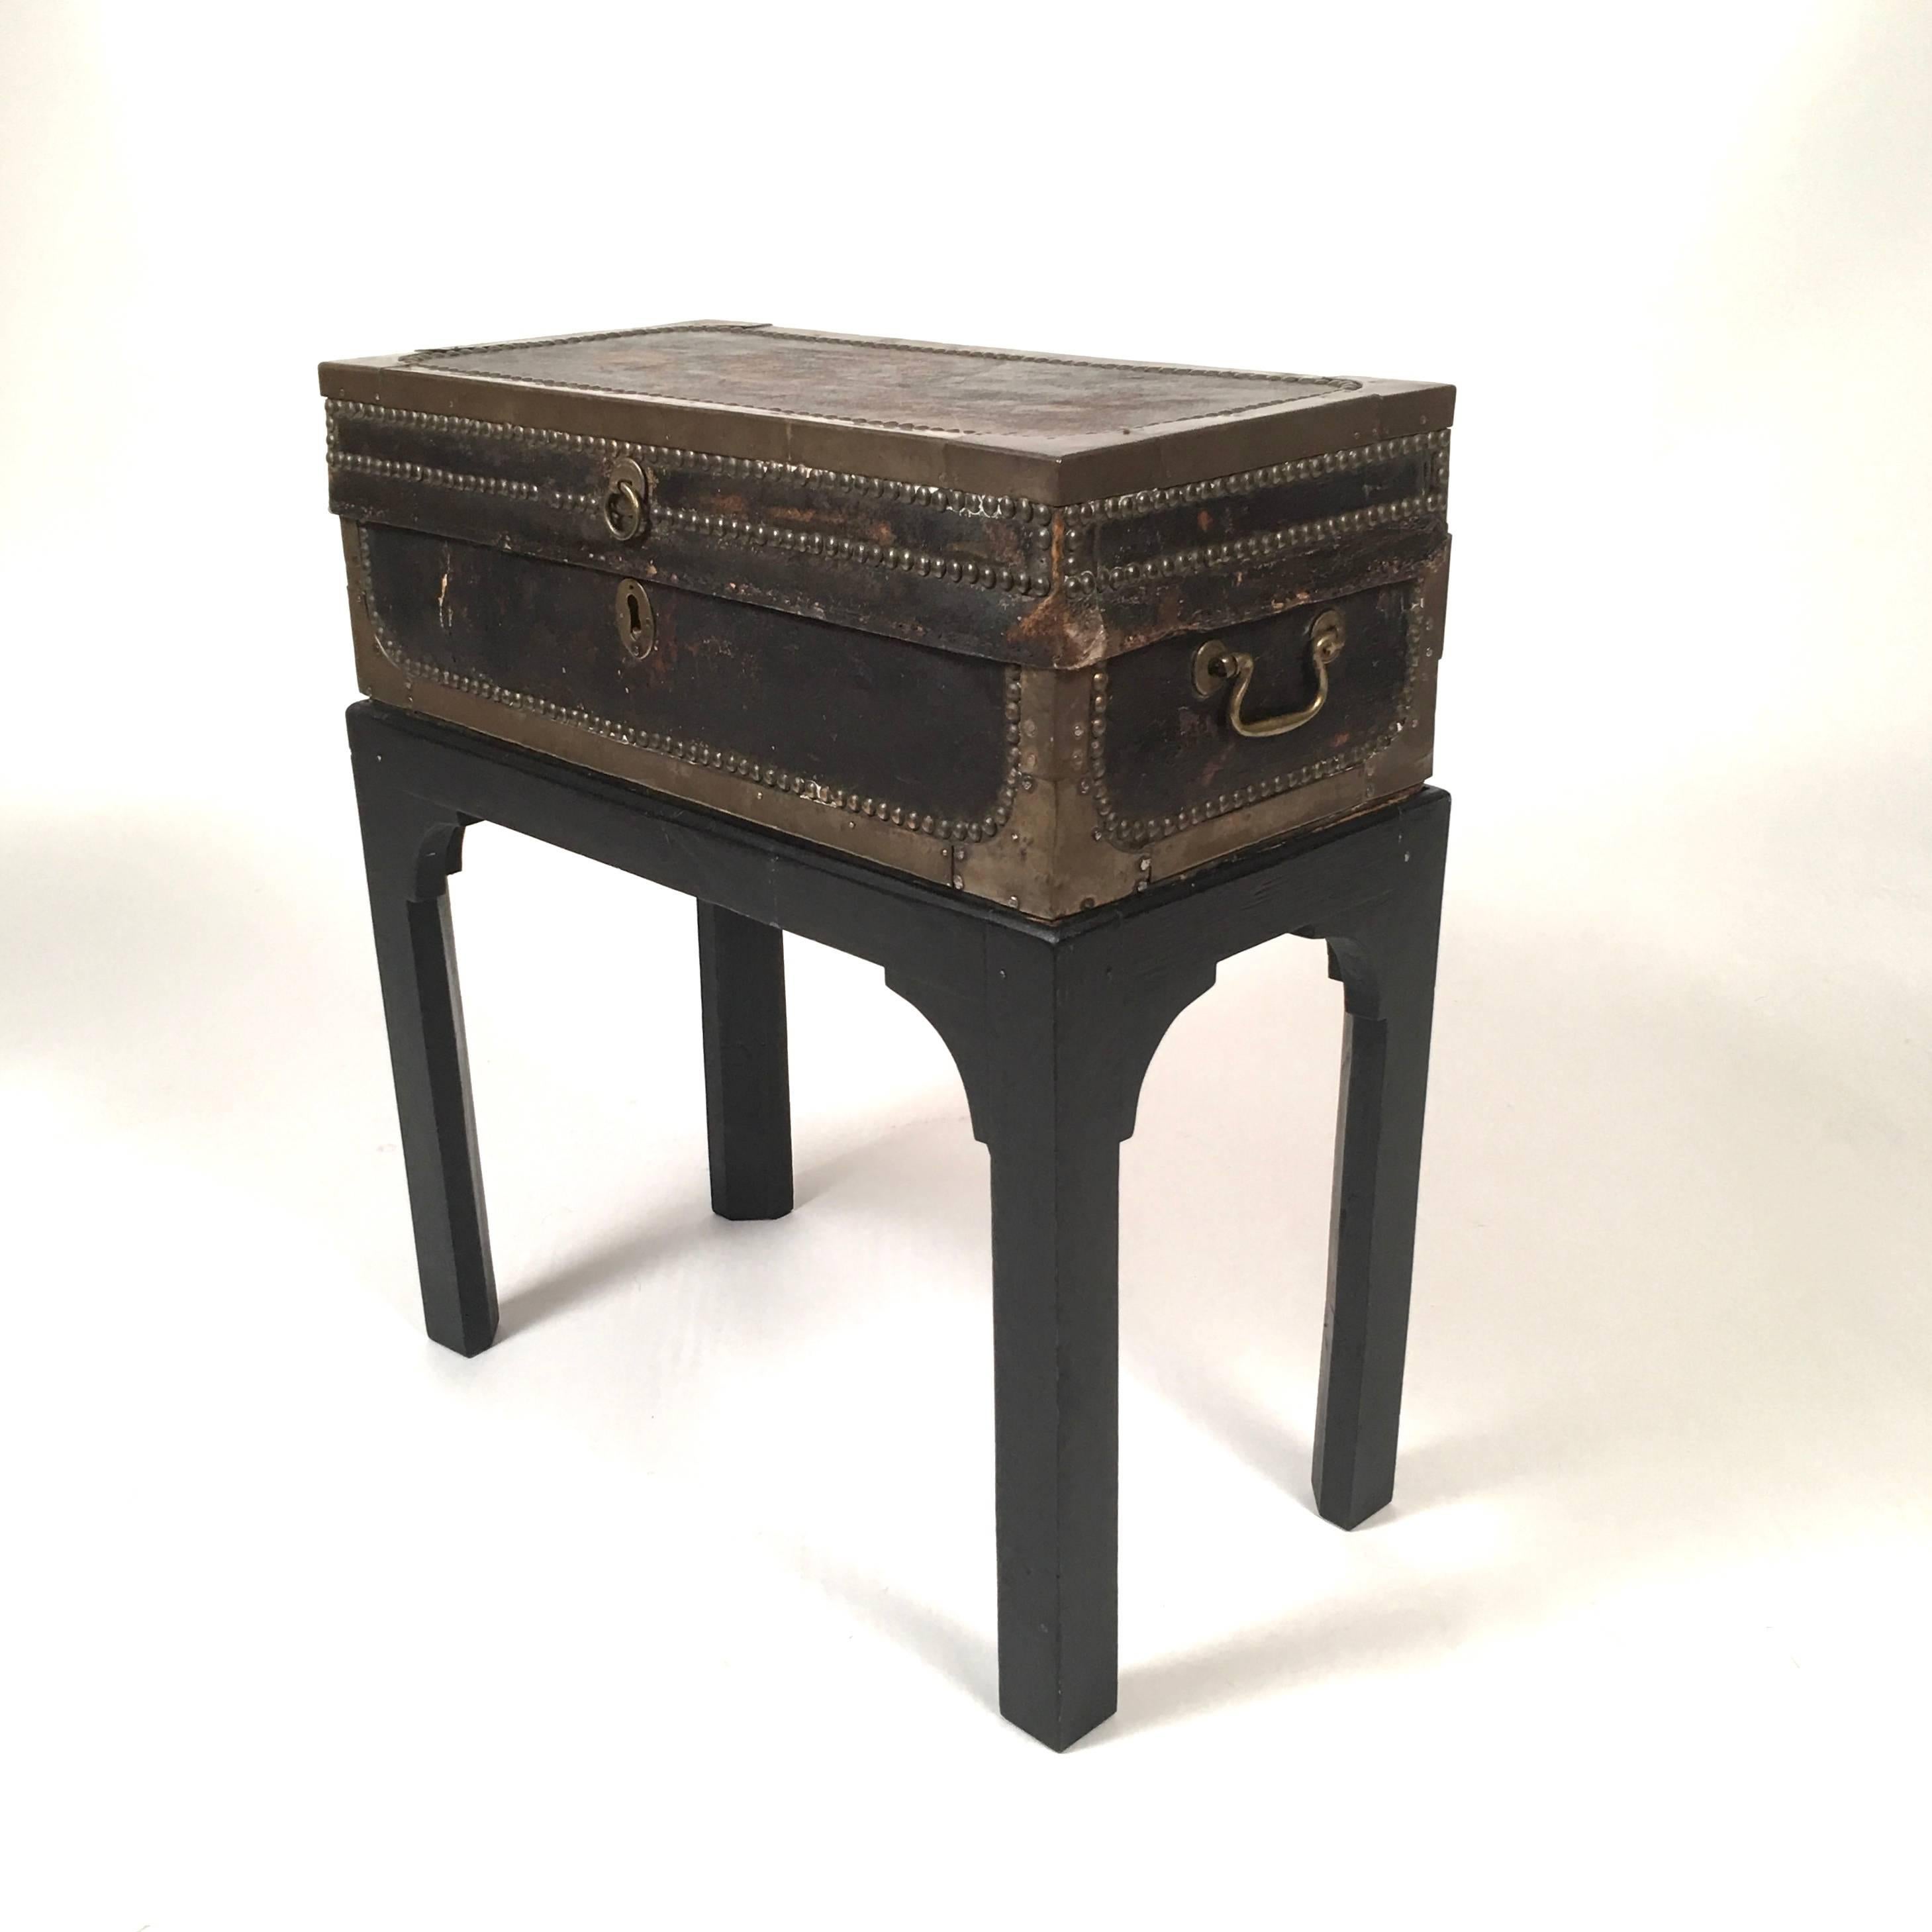 A 19th century leather bound brass stud decorated and mounted wooden sea captain's chest, mounted on a later black painted Chippendale style stand, perfect for a side table next to a chair or sofa. Wonderful small size and patina.

Dimensions on